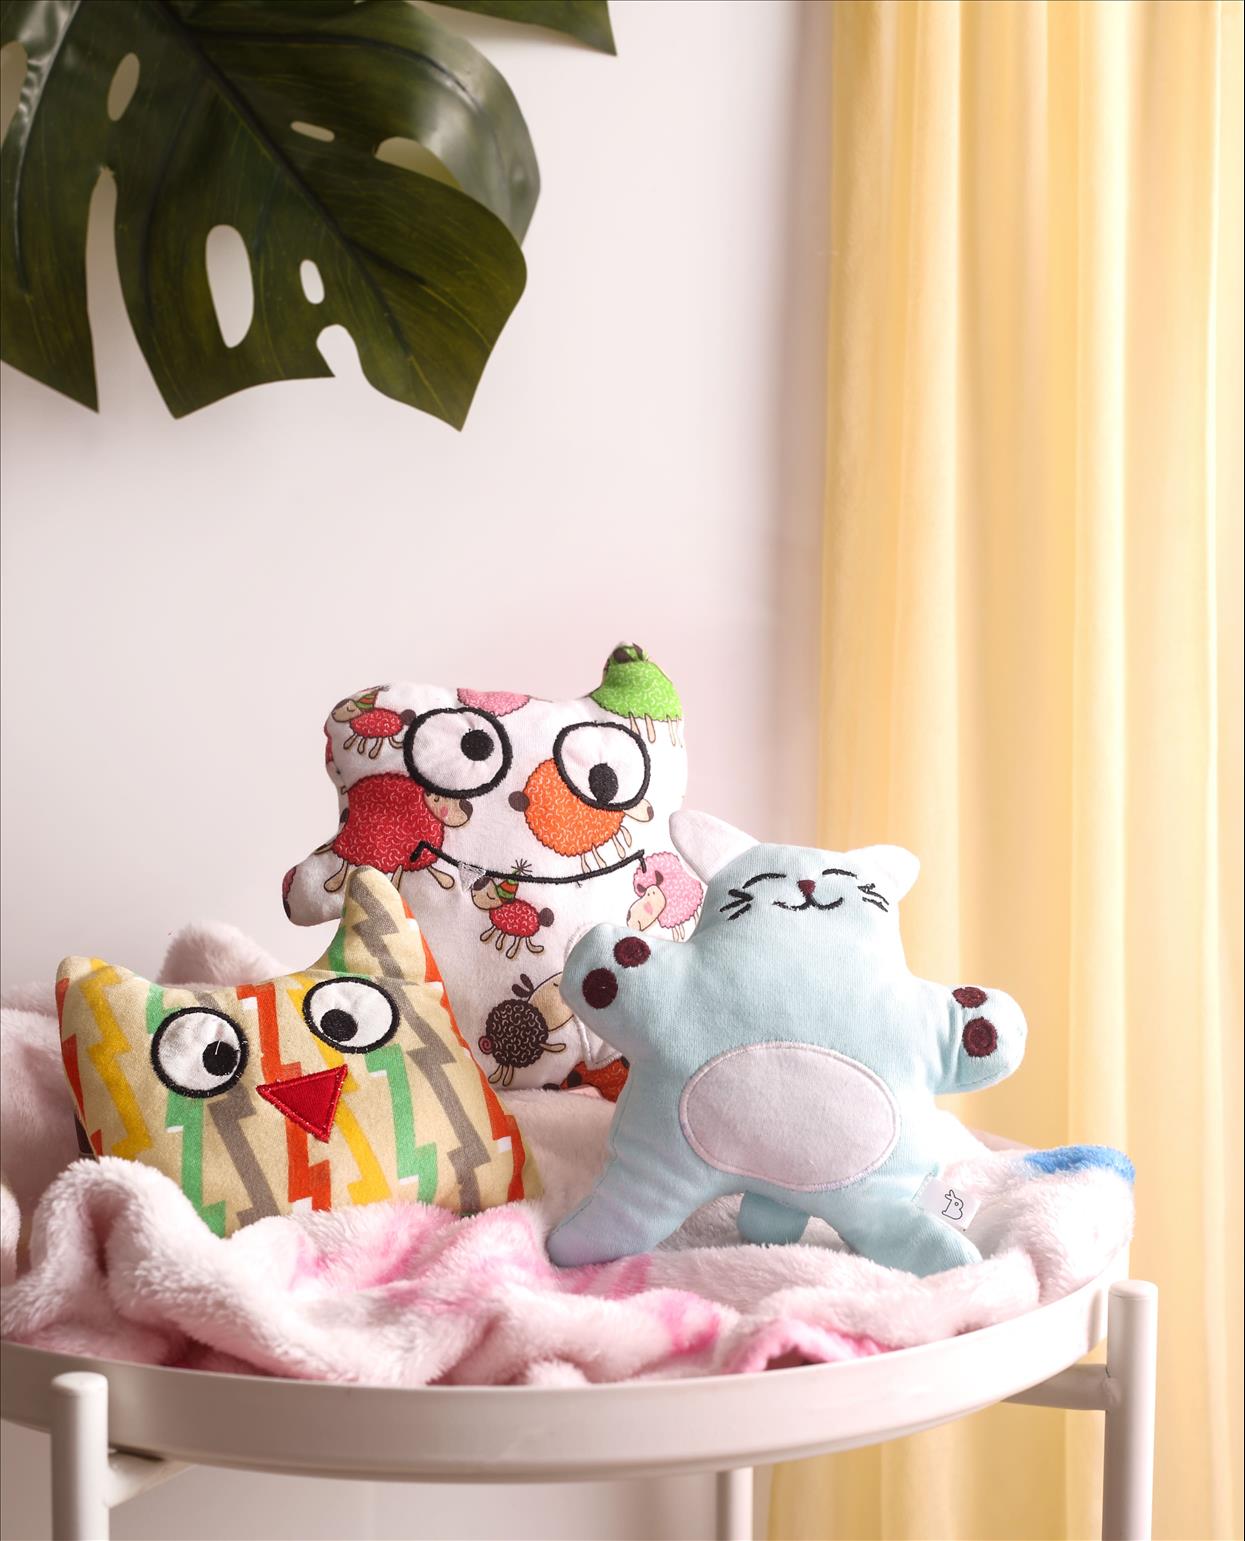 Superbottoms Launches Upcycled Superbuddies Toys As A Leap Towards Circular Economy